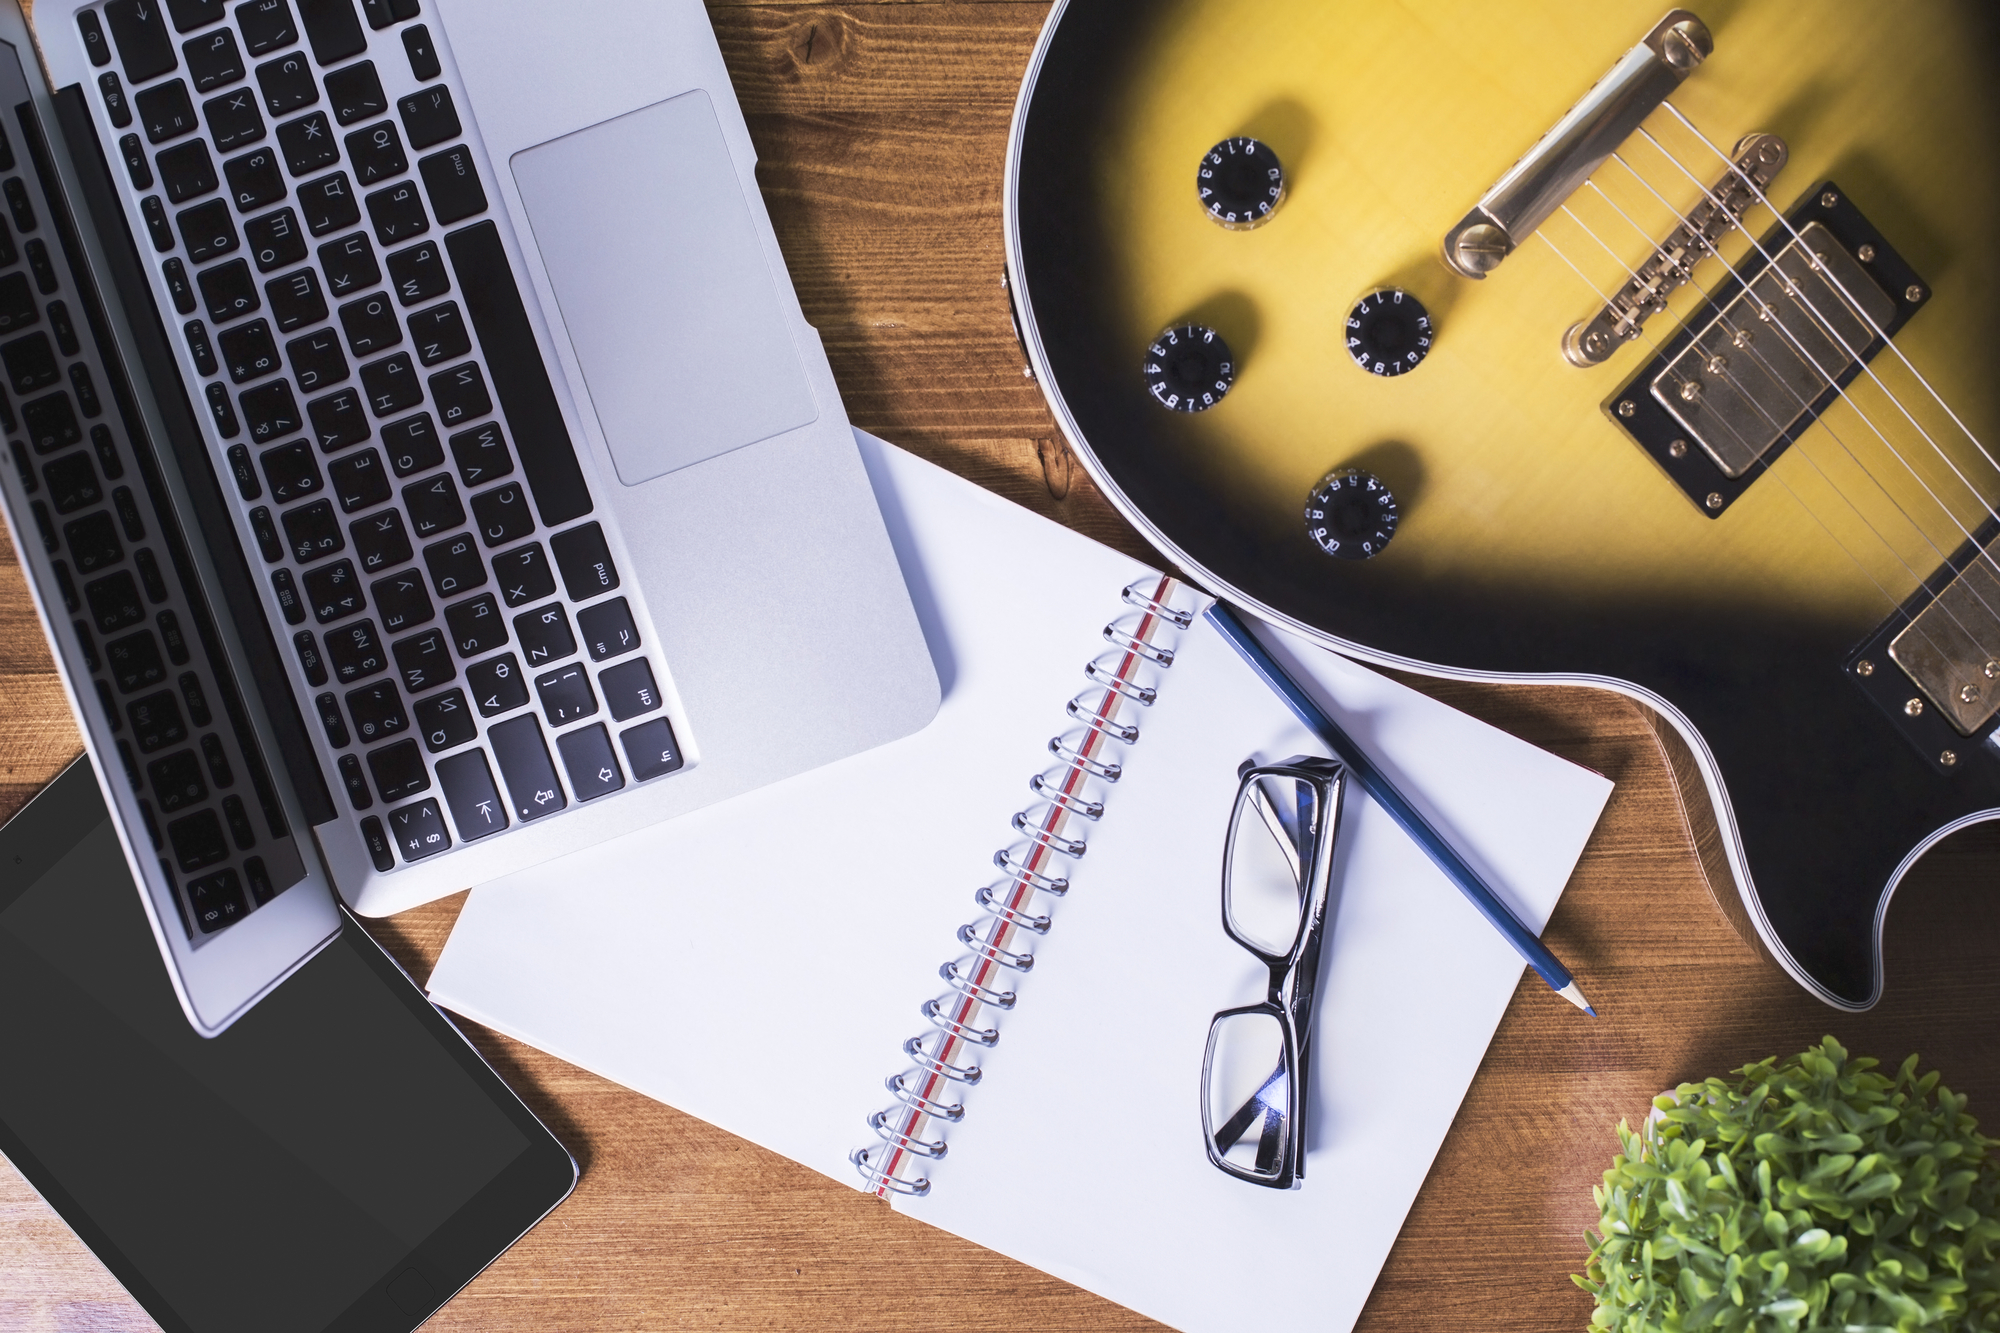 Flatlay of a laptop, guitar, notebook, glasses, and a pencil on a wooden desk suggesting a creative workspace where one can write song lyrics or engage in music composition.